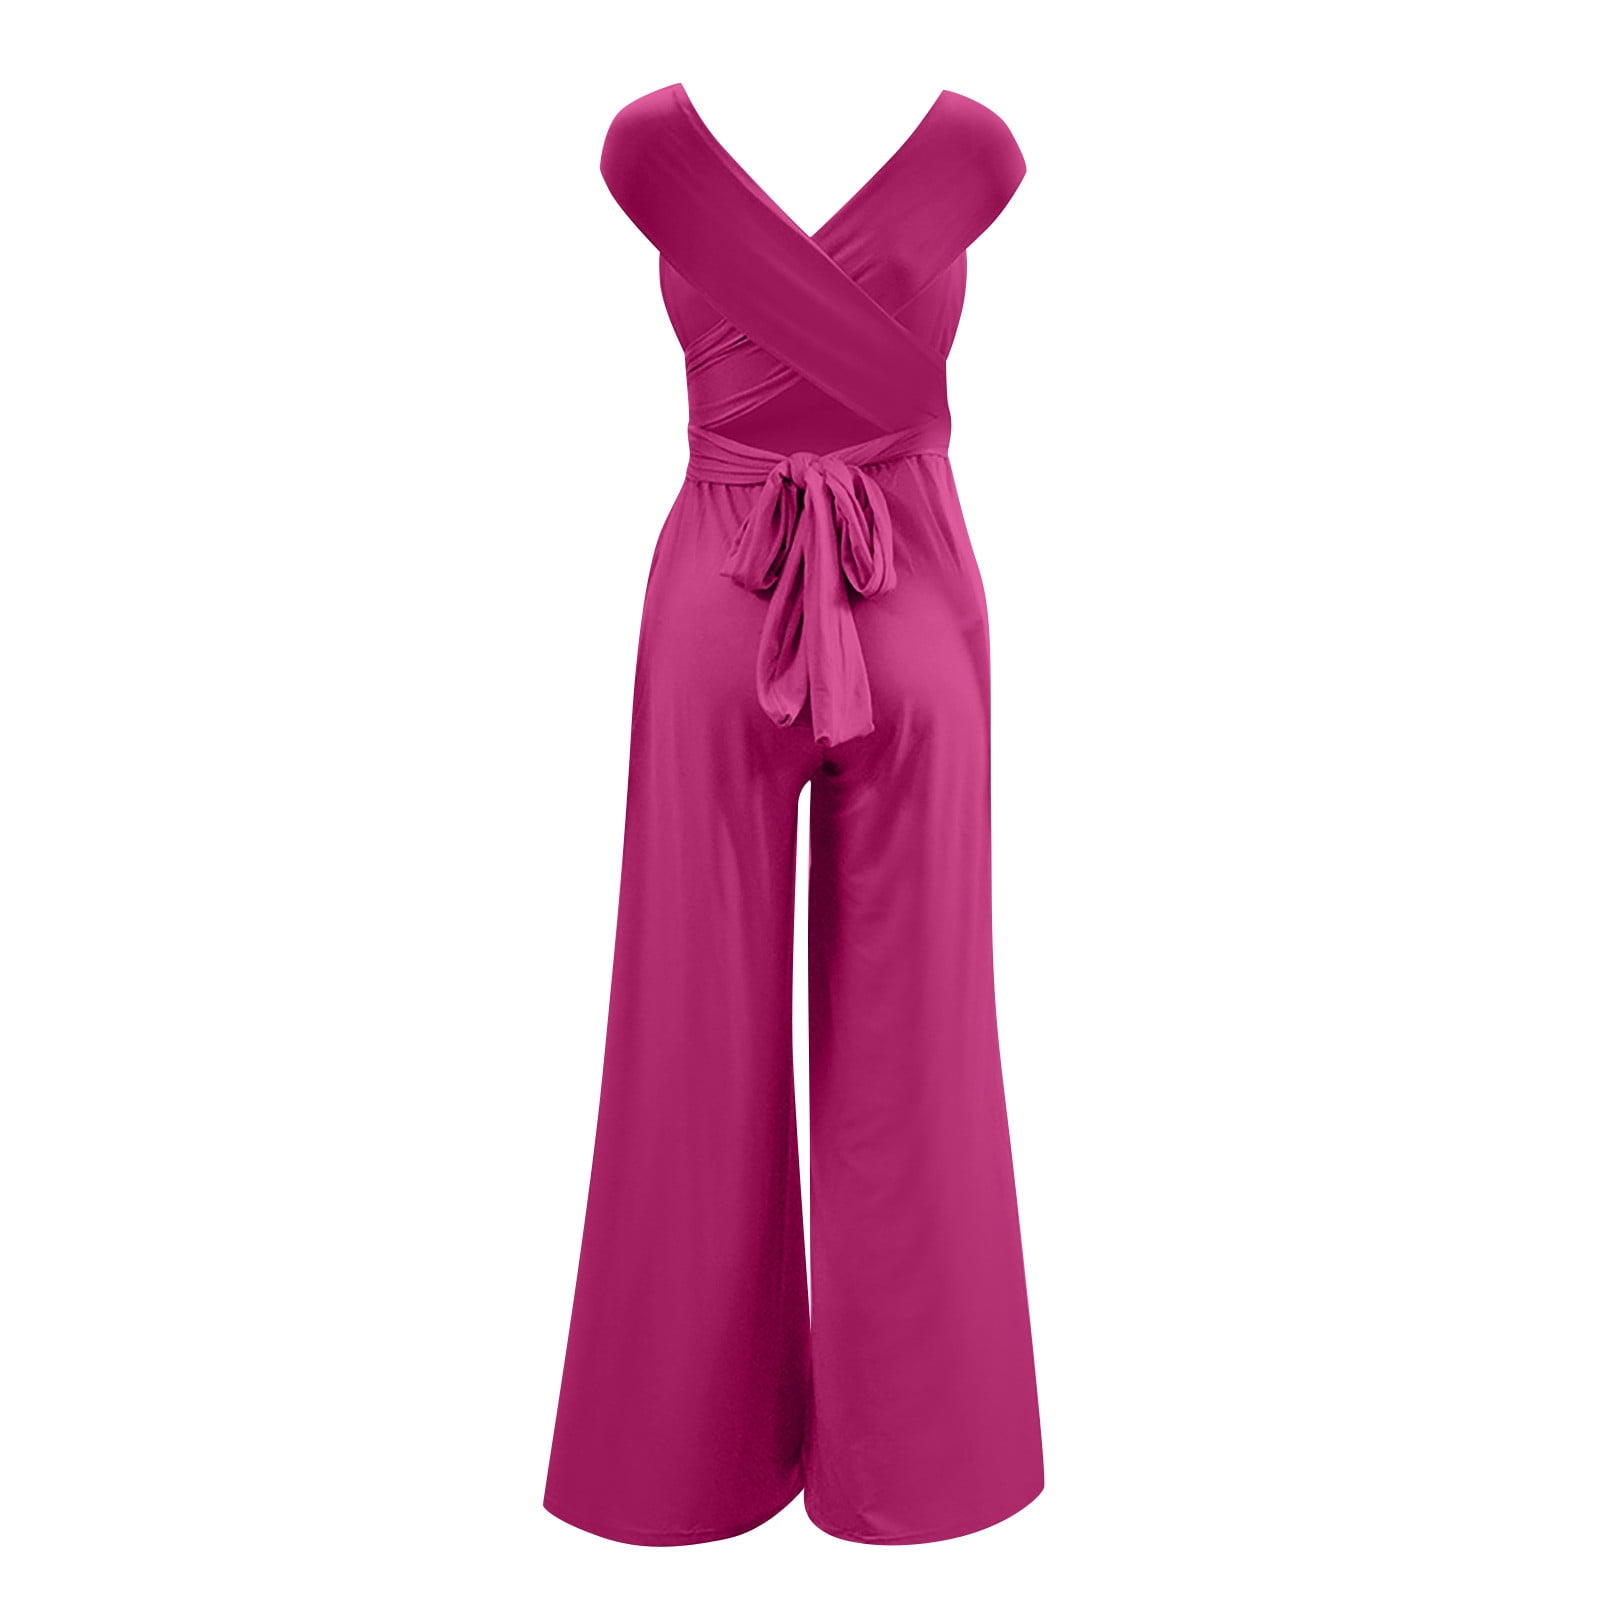 Elegant Fuchsia Dressy Jumpsuits With Sleeves For Women Shiny Puff Sleeves,  Wide Leg, Perfect For Parties, Evenings, And Celebrities Style 221128 From  Kong04, $30.6